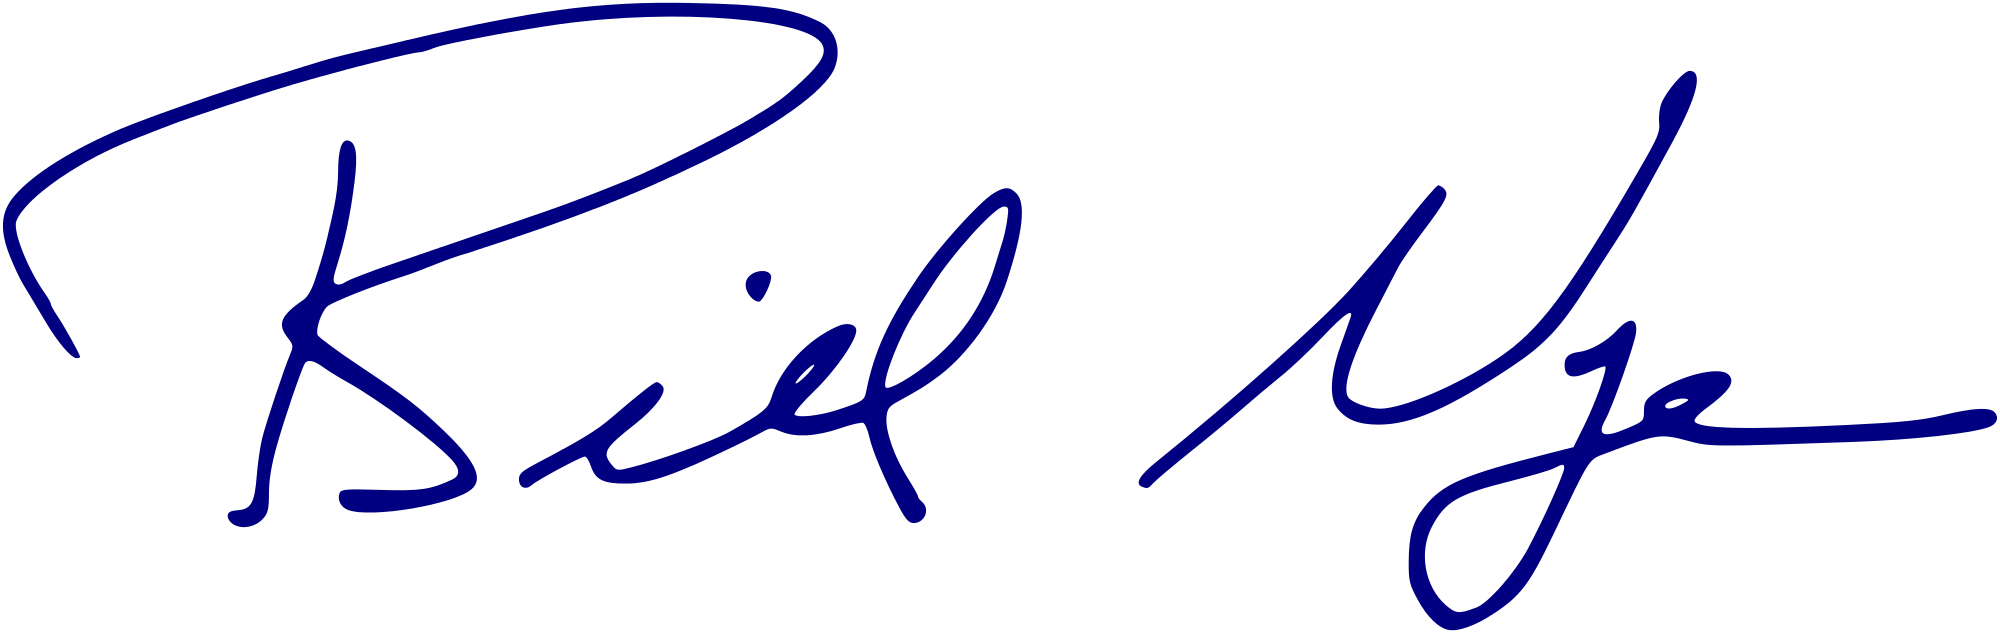 Bill Nye Signature - Bill Nye The Science Guy Signature (1000x316), Png Download